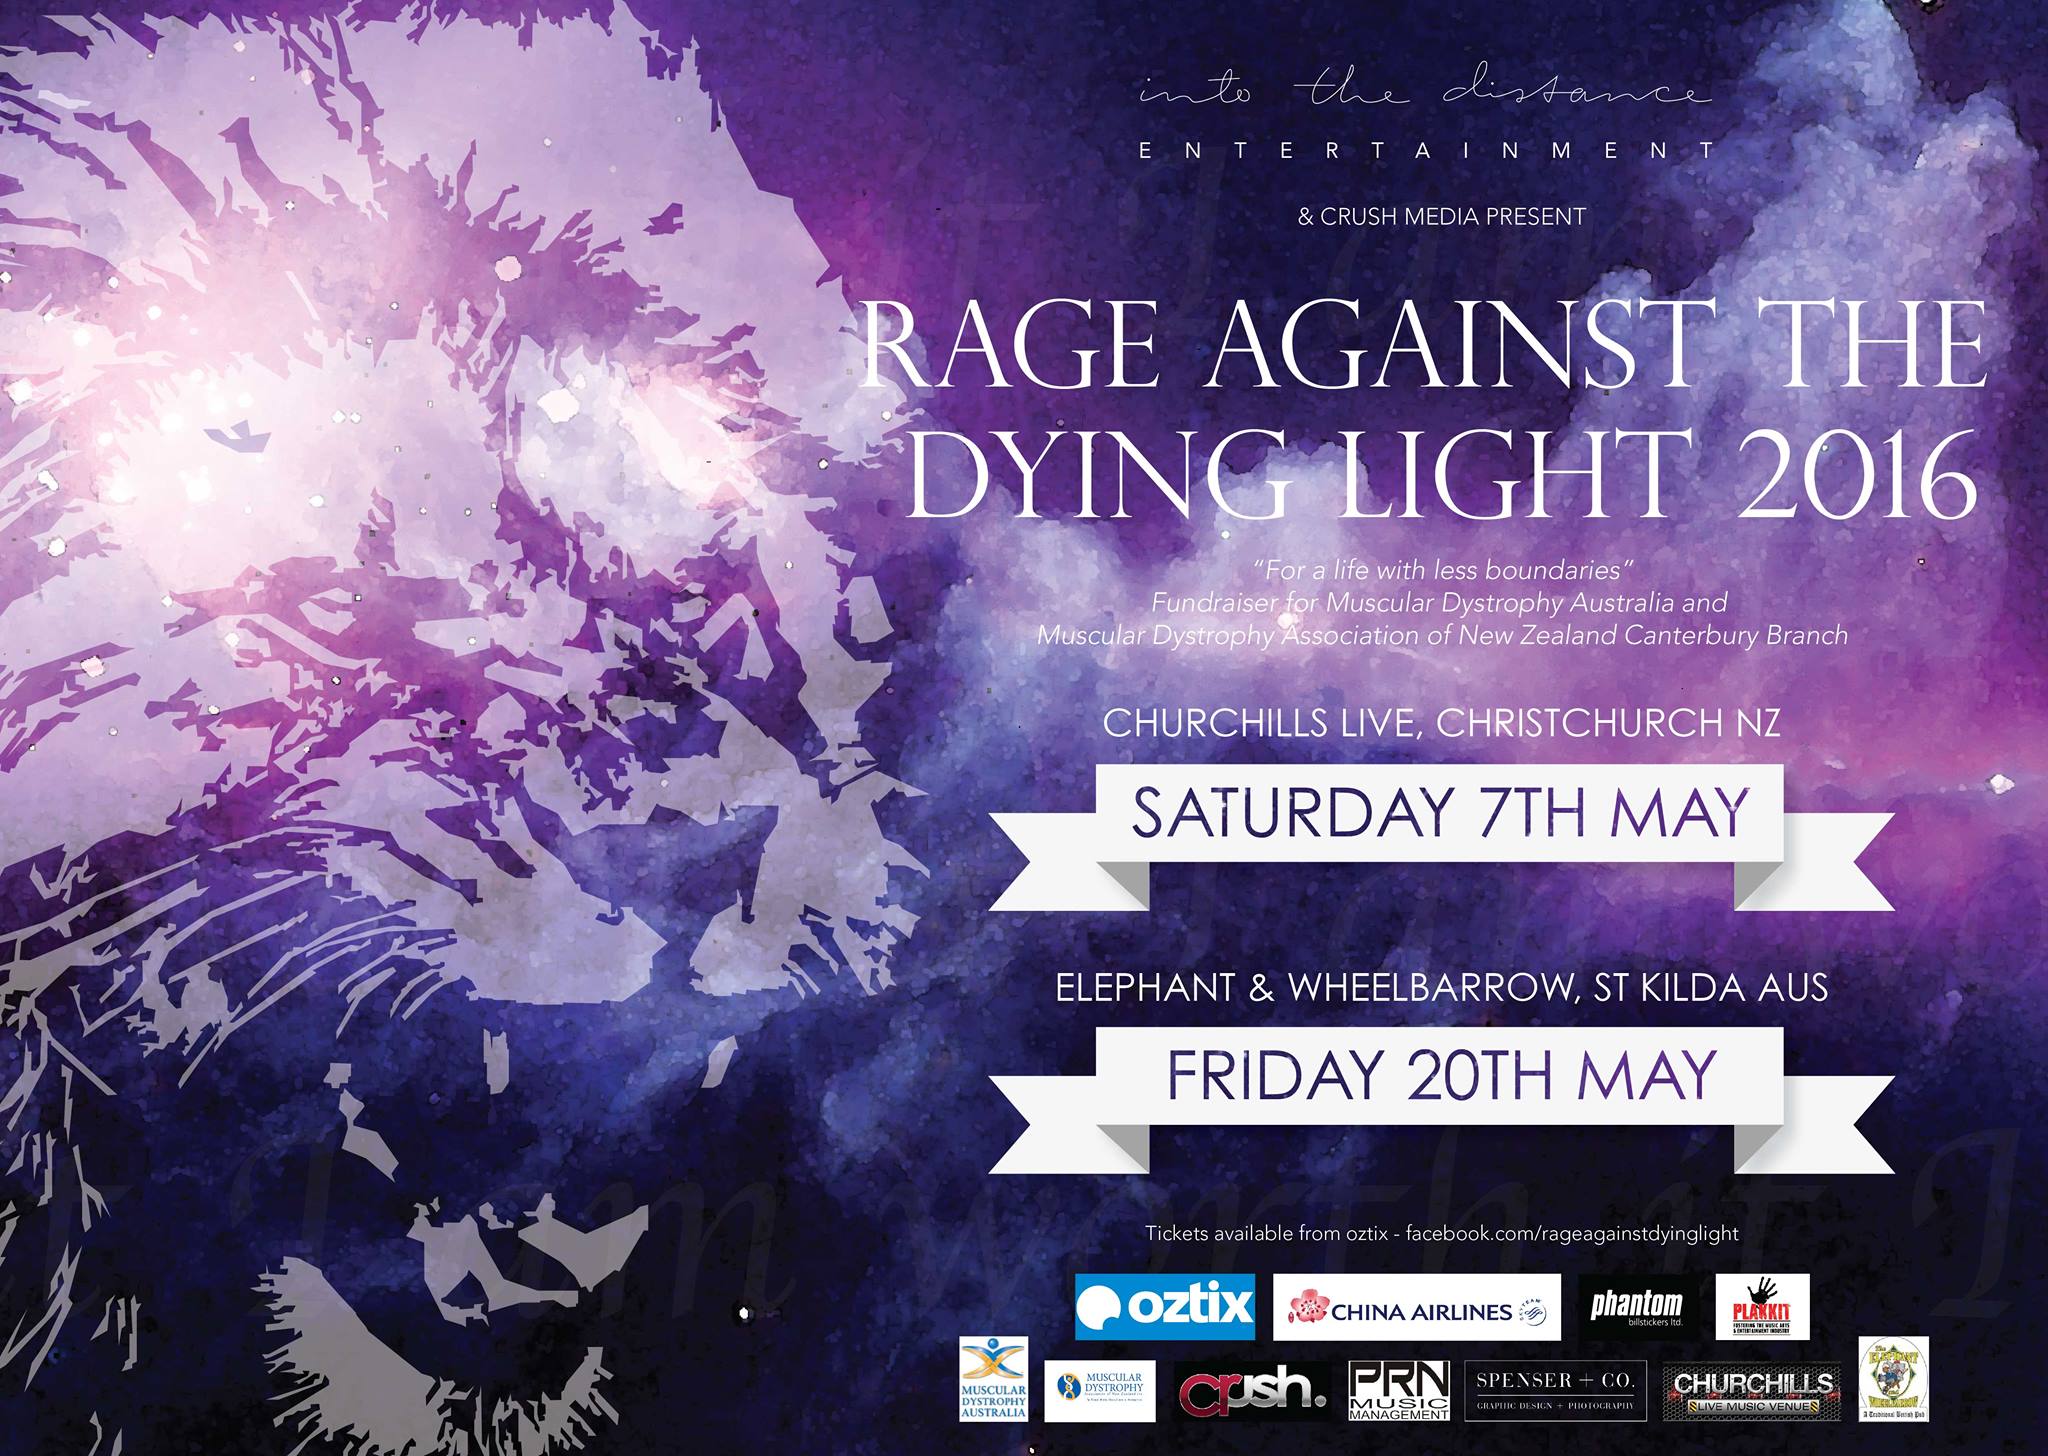 TEN THOUSAND TO HEADLINE THE INAUGURAL 'RAGE AGAINST THE DYING LIGHT' MELBOURNE SHOW